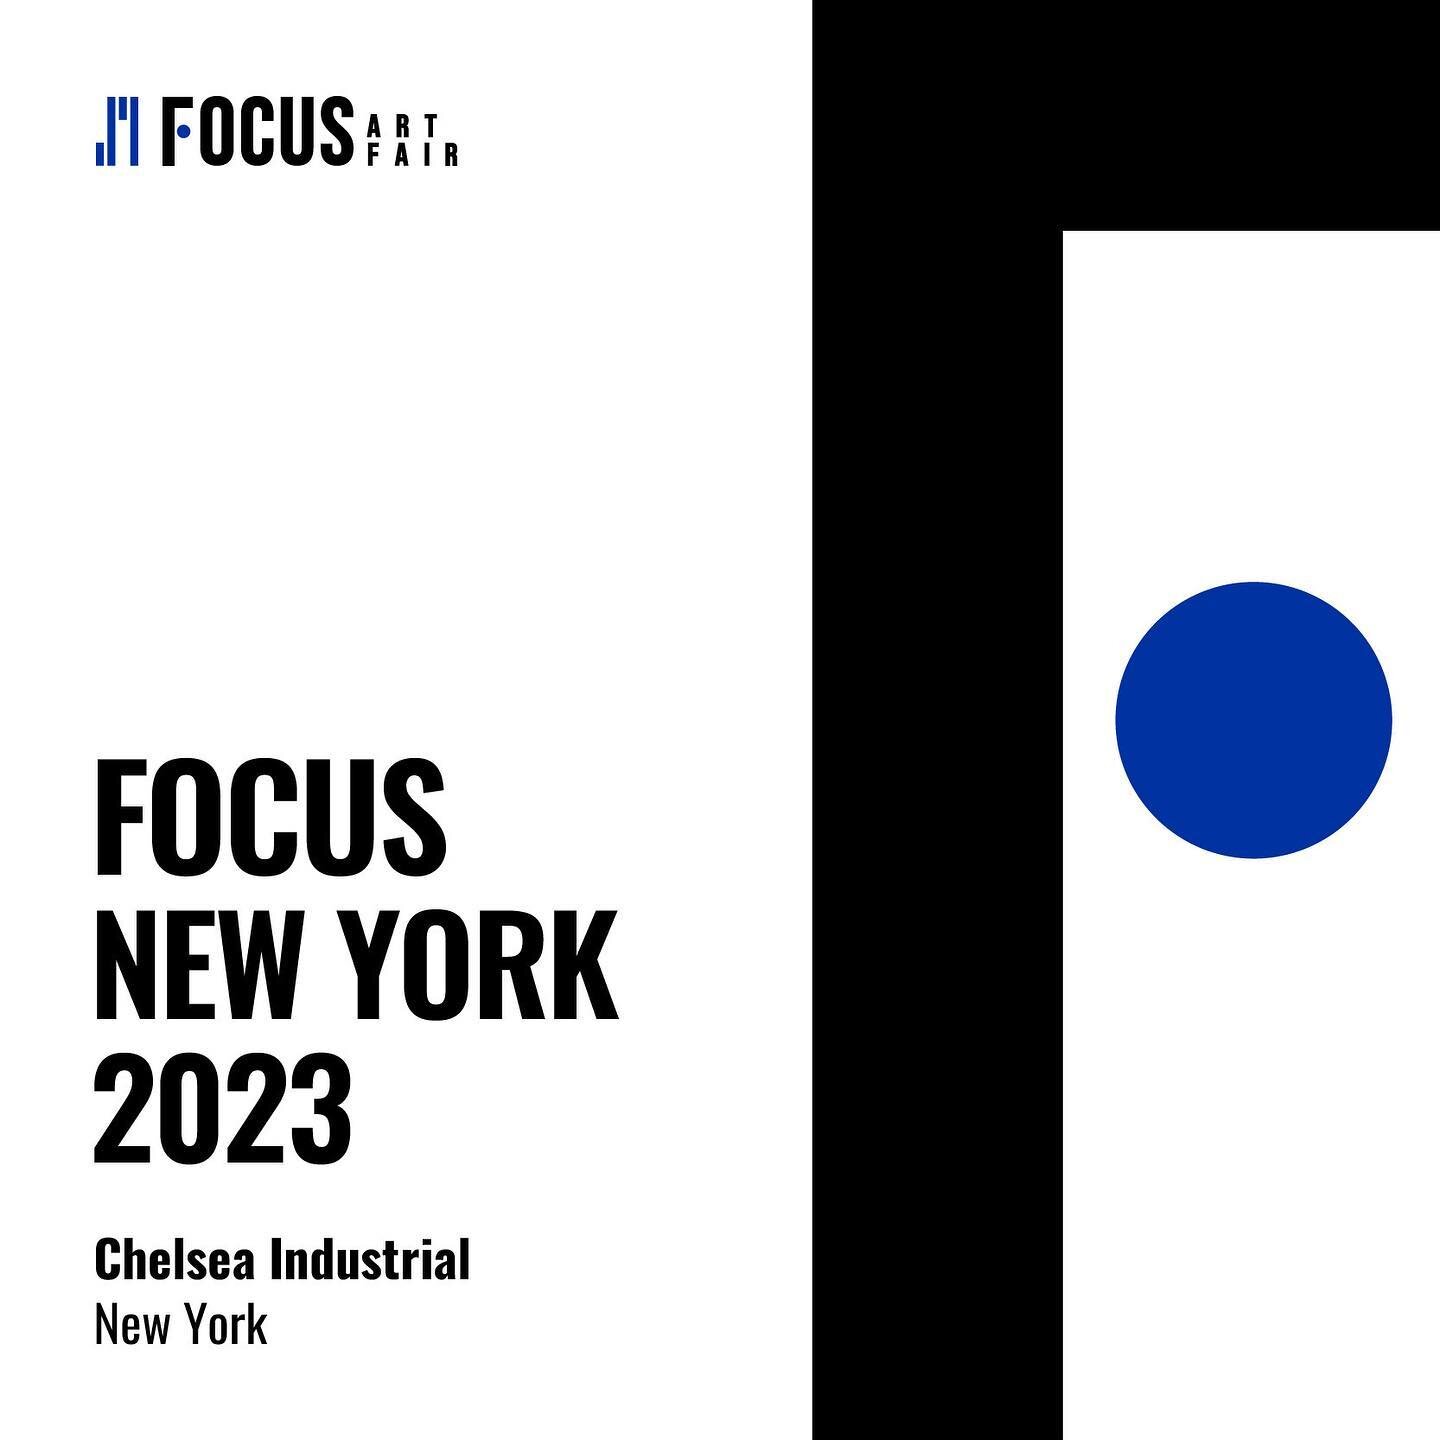 @focusartfair is excited to announce the arrival of FOCUS New York 2023.

The event is scheduled for May 18th - 21st, 2023 at Chelsea Industrial in New York.

Chelsea Industrial is the noteworthy venue for FOCUS New York 2023, according to Focus art 